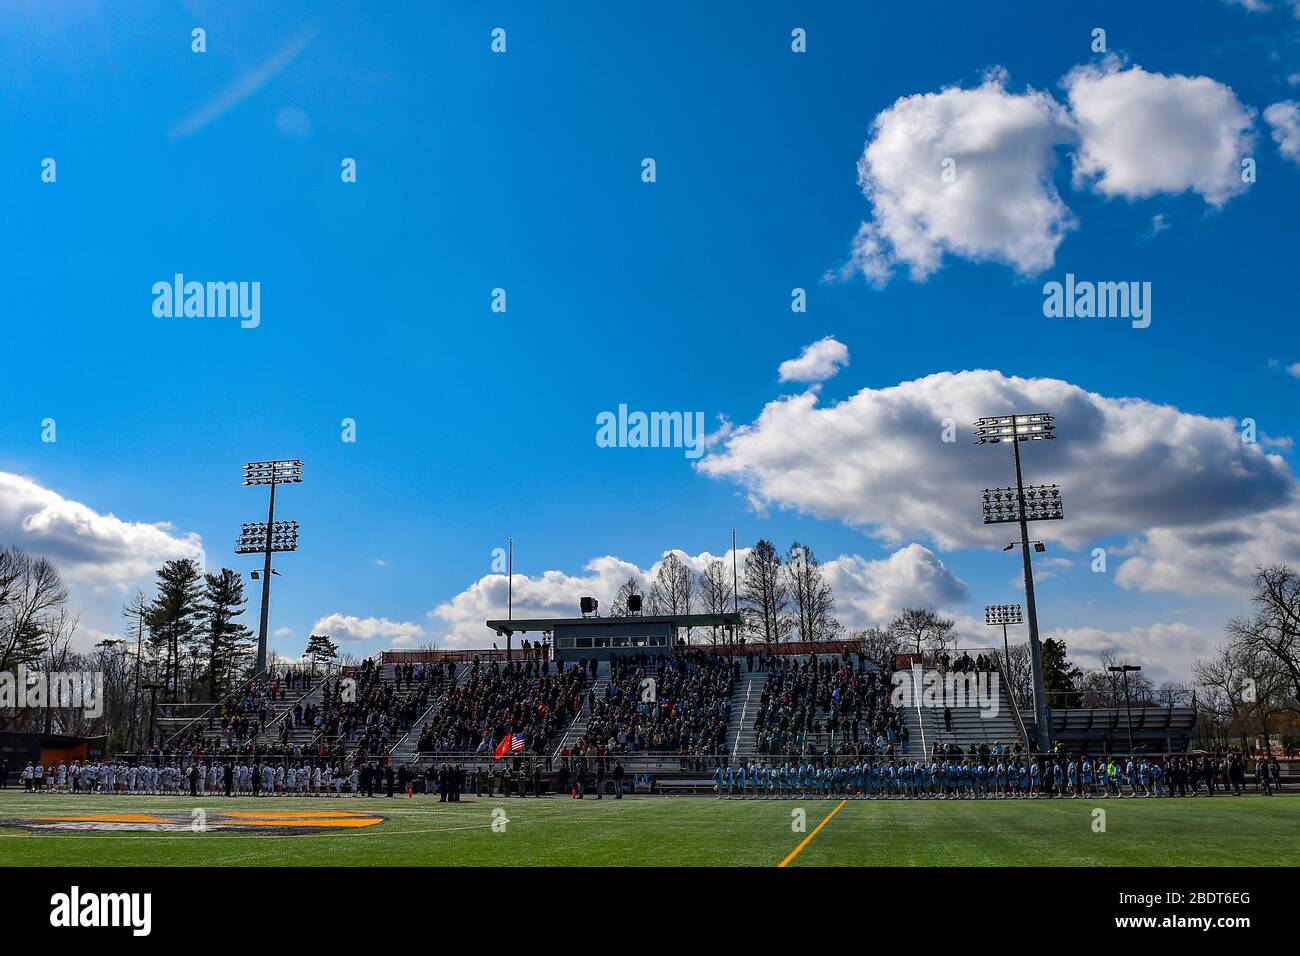 Princeton, New Jersey, USA. 29th Feb, 2020. General view of Class of 1952 Stadium prior to an NCAA MenÕs lacrosse game between the Princeton Tigers and the Johns Hopkins Blue Jays on February, 29, 2020 in Princeton, New Jersey. Princeton defeated Johns Hopkins 18-11. Rich Barnes/CSM/Alamy Live News Stock Photo